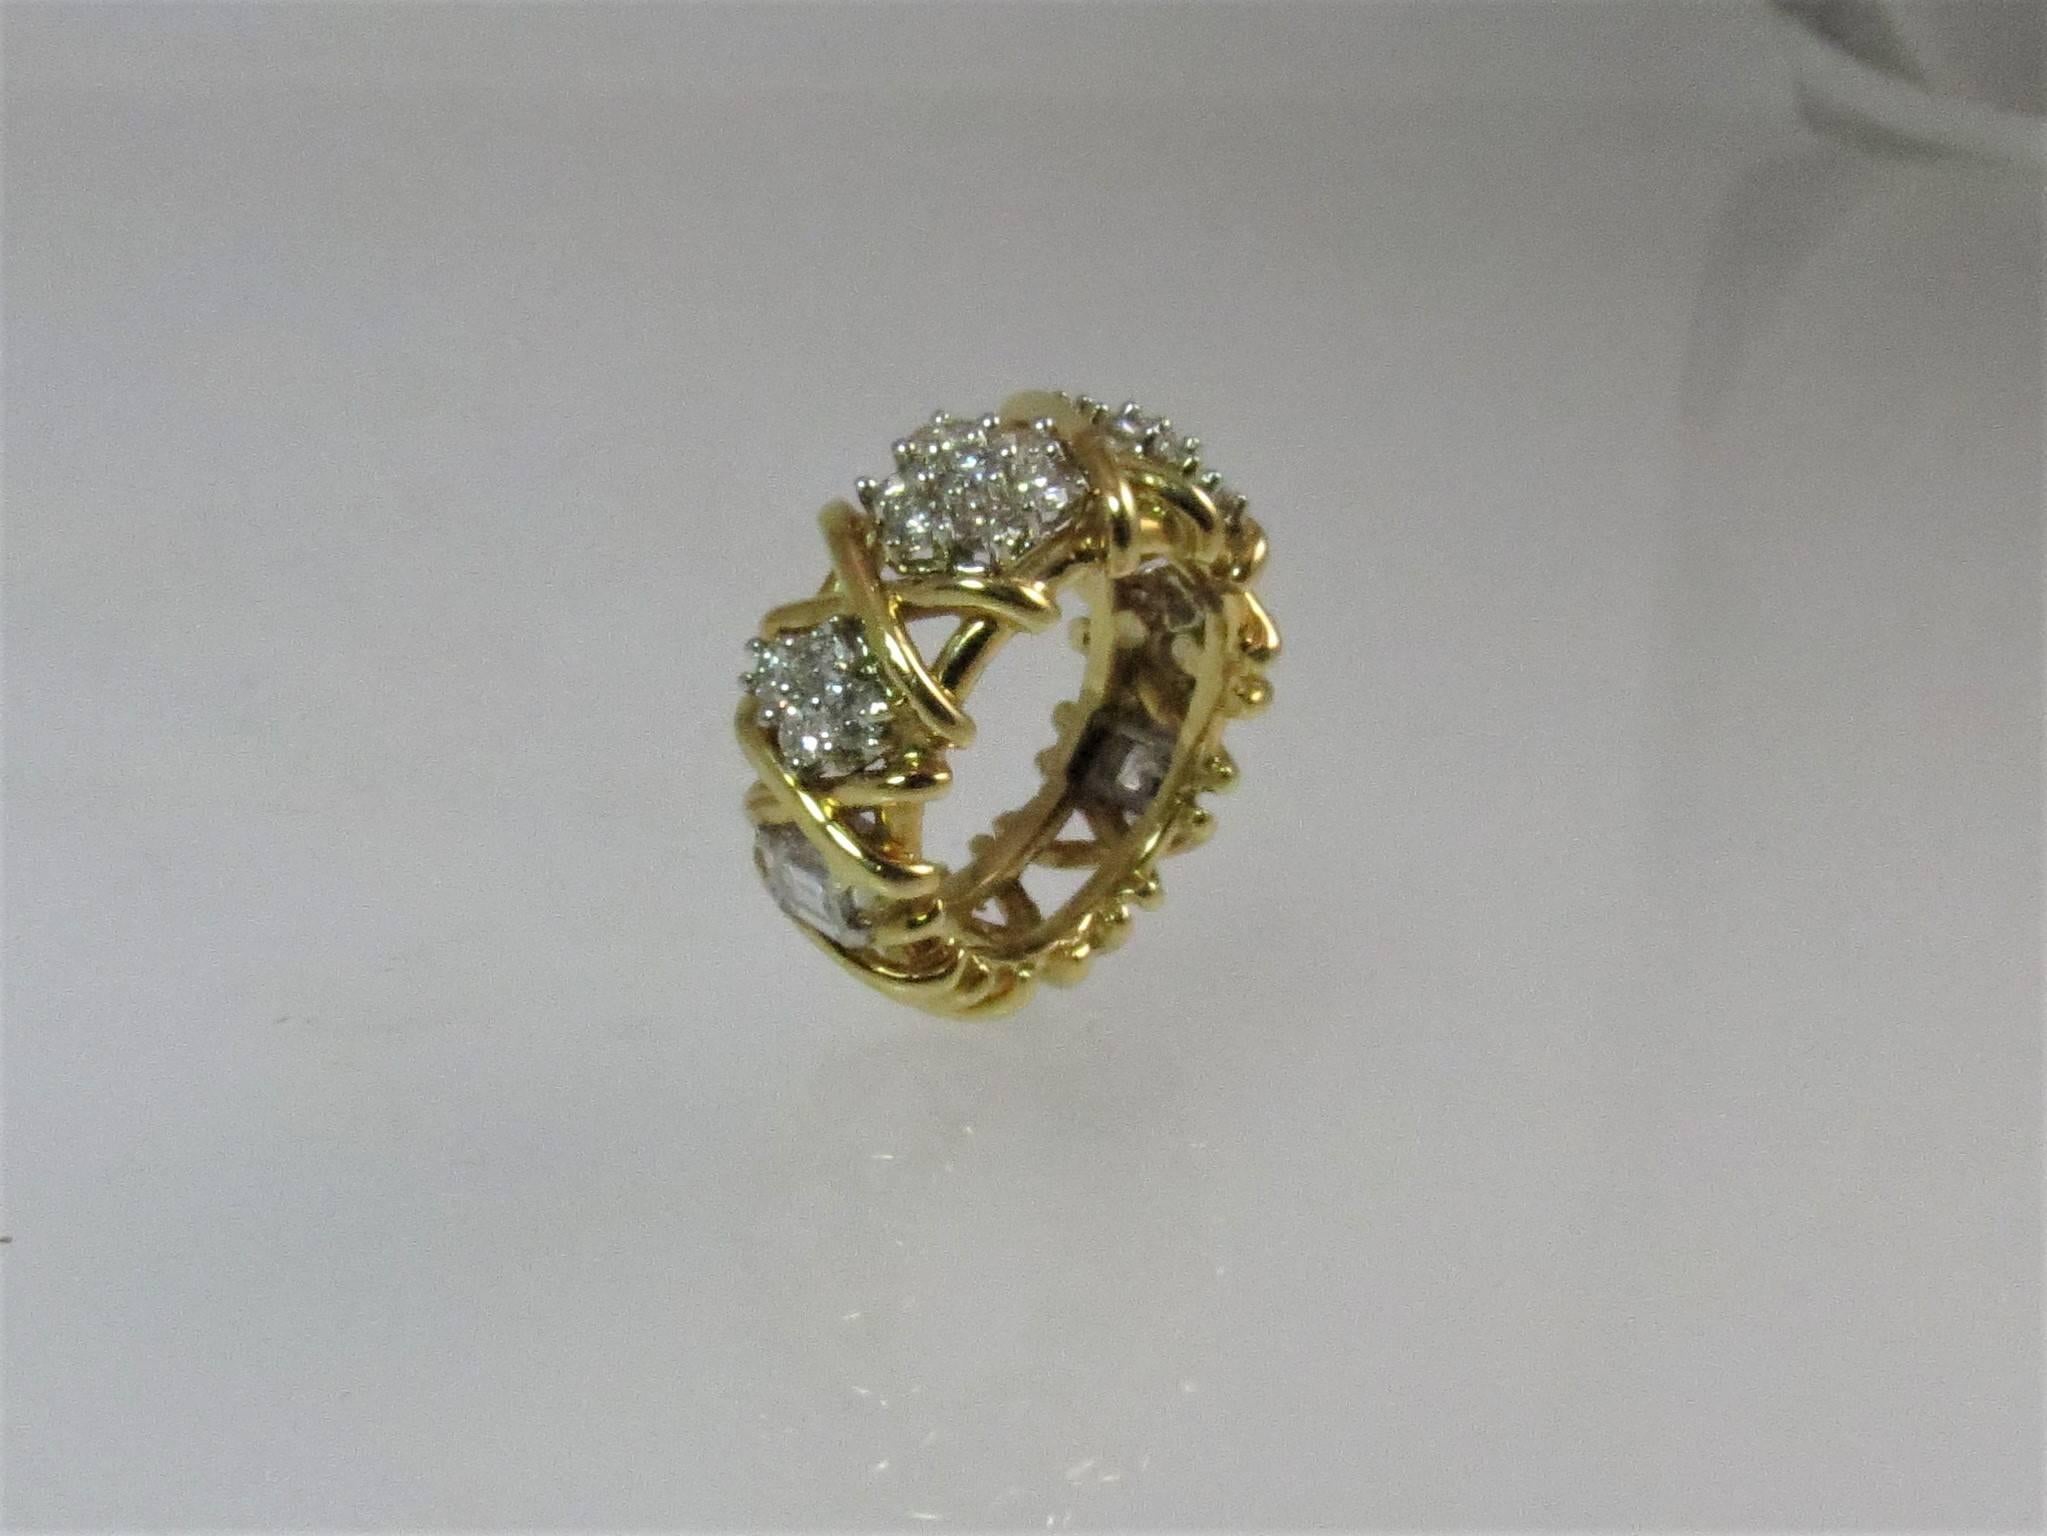 Stunning 18K yellow gold and diamond band ring set with 22 full cut round diamonds weighing 1.48cts F-G color, VS clarity and 2 step cut diamonds weighing .70cts F-G color, VS clarity
Finger size 6.